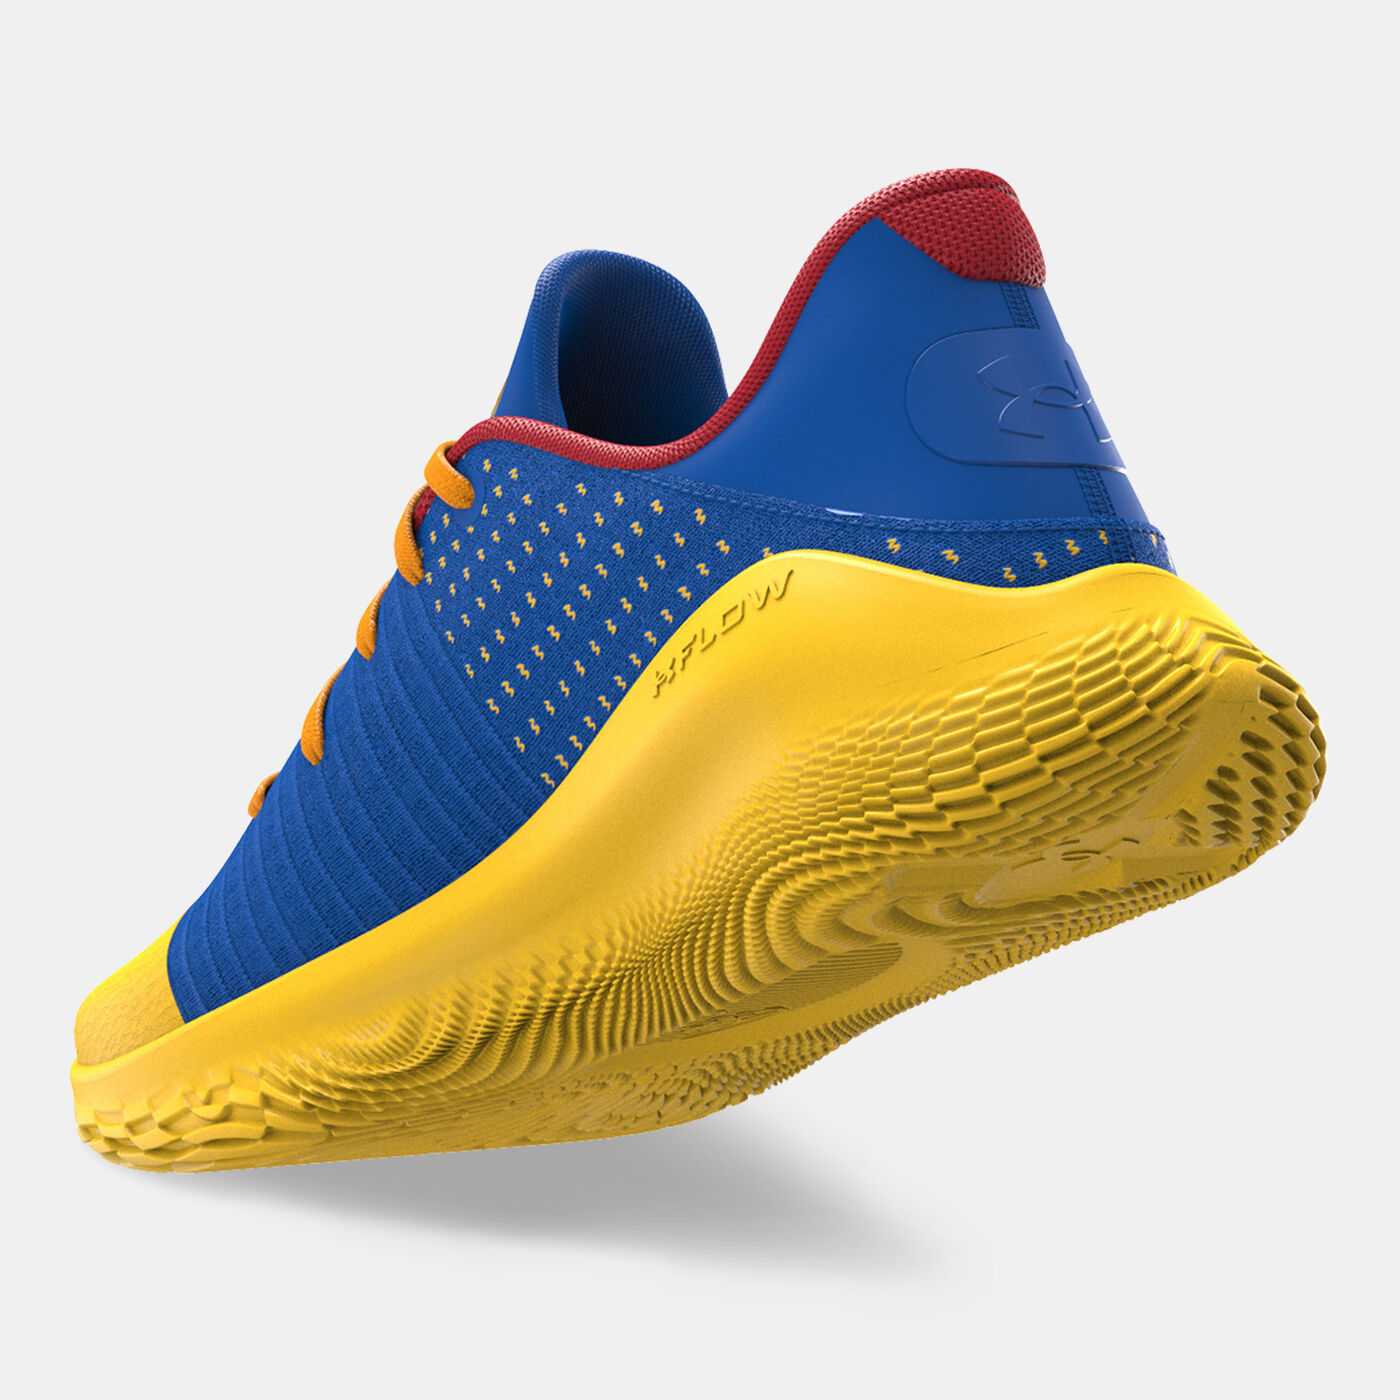 Curry 4 Low FloTro Basketball Shoes